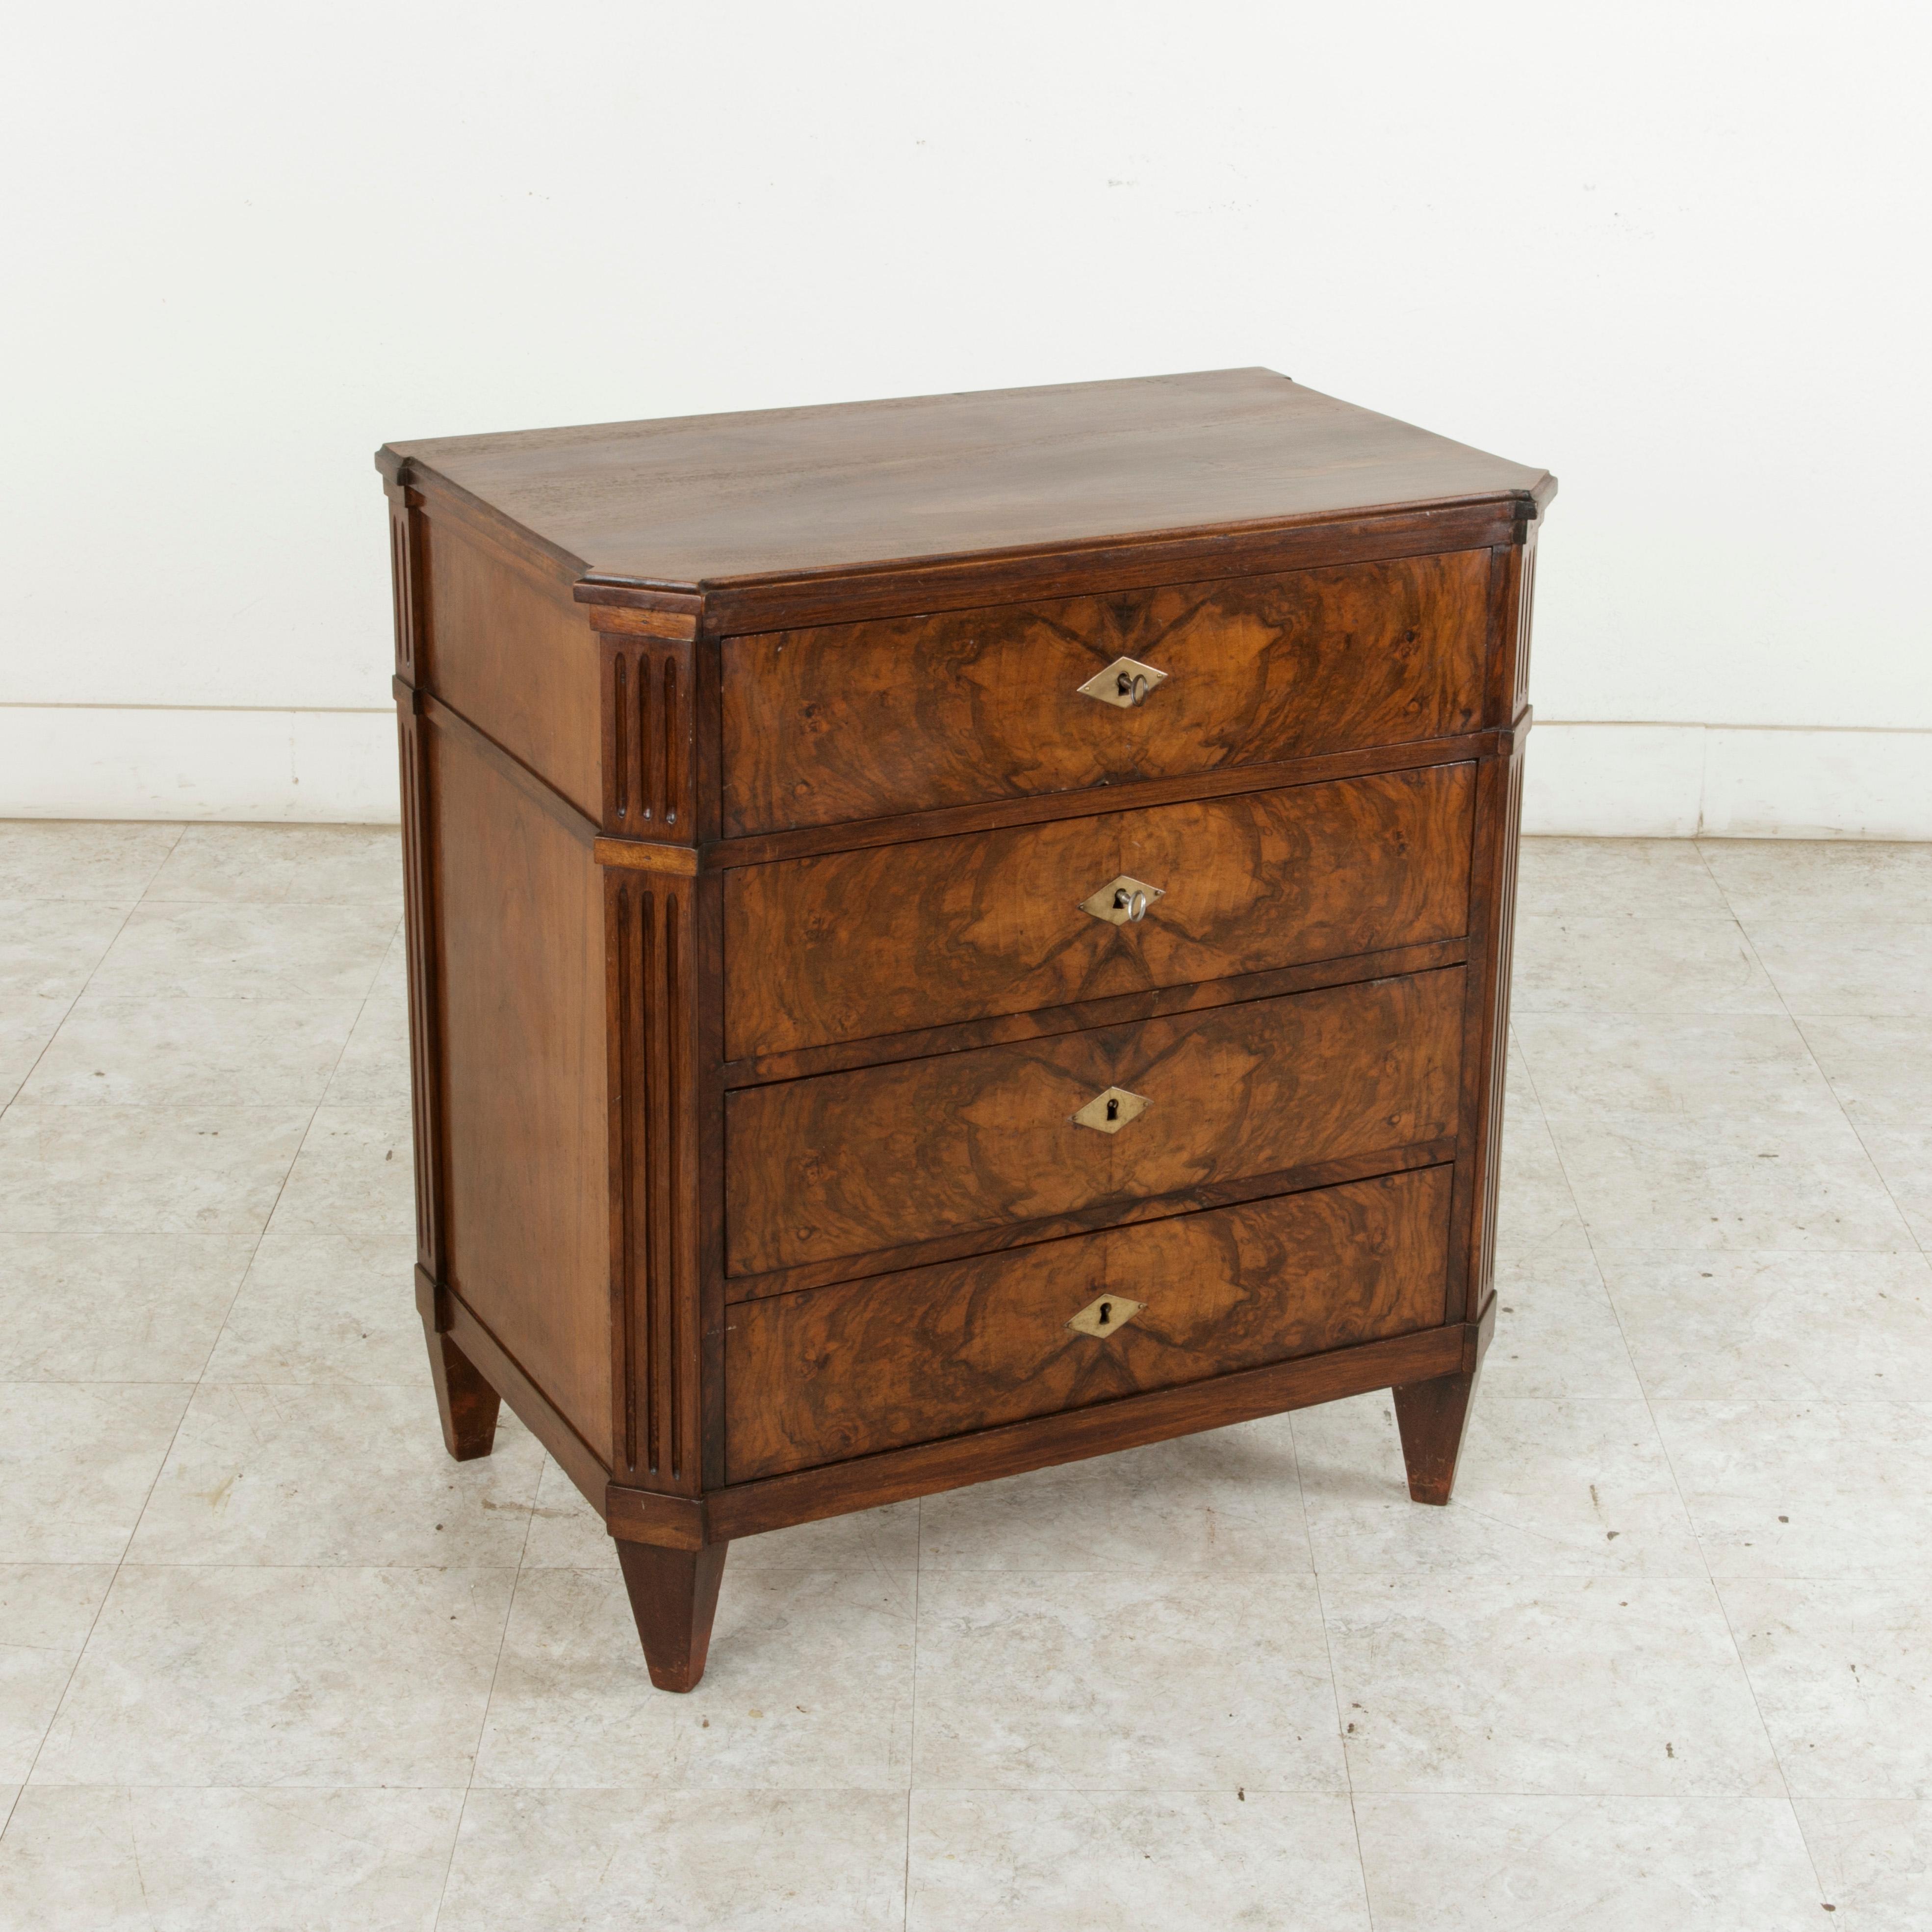 This French commode or chest from the late 19th century features a mix of French furniture styles. Its beautiful bookmatched burl walnut facade is reminiscent of the Louis Philippe style, while its fluted corners and tapered square legs recall the